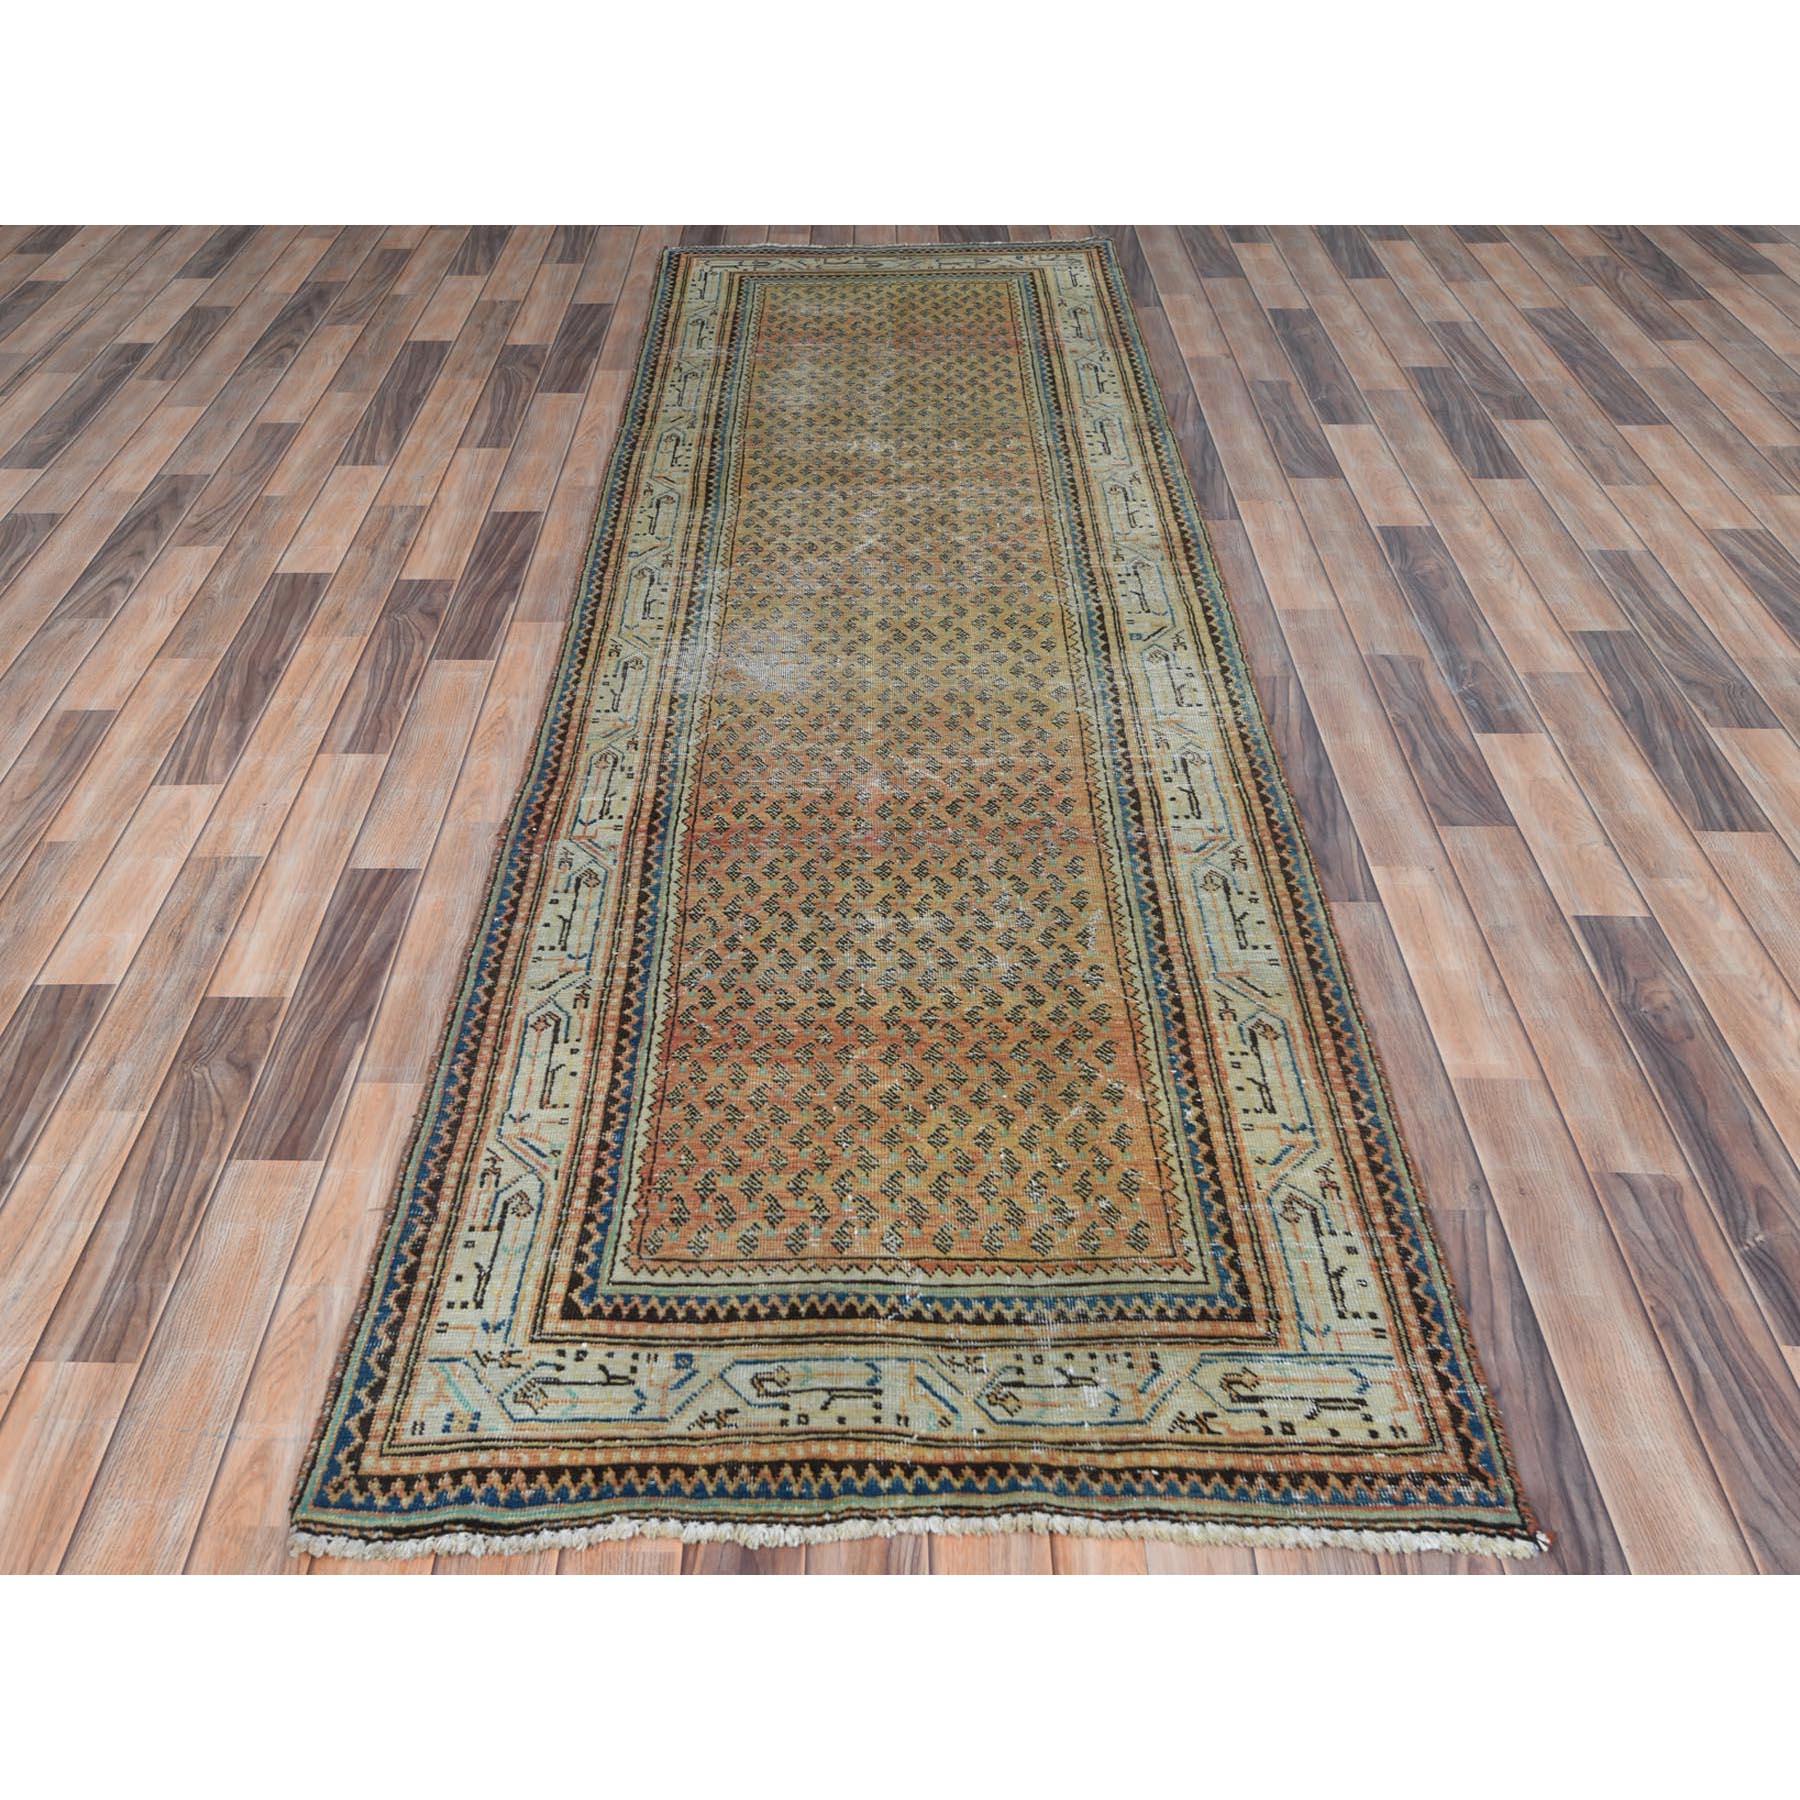 This fabulous hand-knotted carpet has been created and designed for extra strength and durability. This rug has been handcrafted for weeks in the traditional method that is used to make
Exact rug size in feet and inches : 3'2